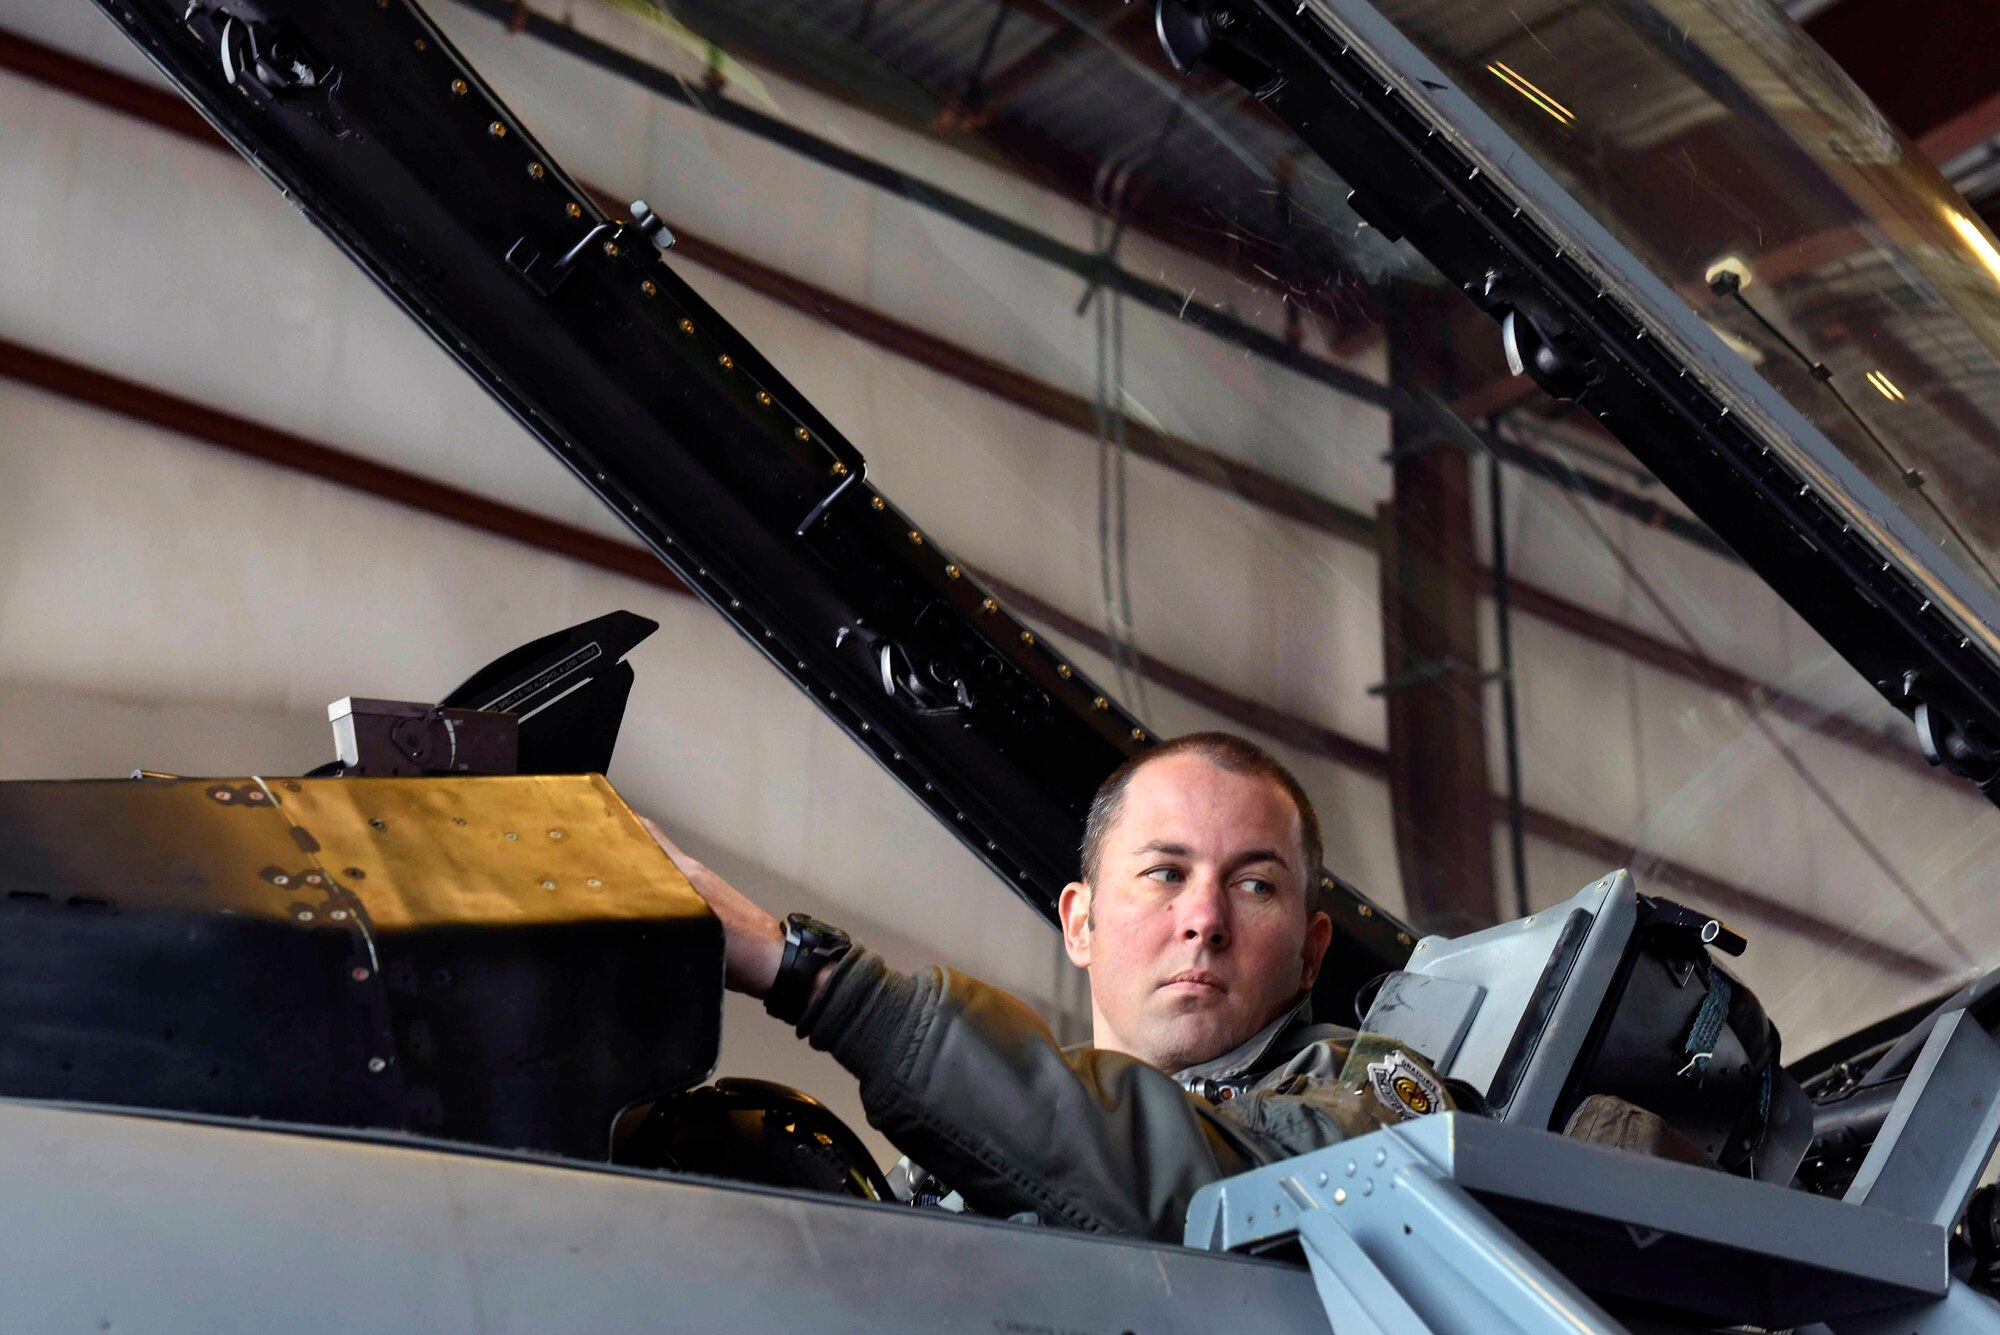 Air Force Lt. Col. Jason Halvorsen, a pilot with the District of Columbia Air National Guard's Aerospace Control Alert Detachment, goes through a pre-flight check in an F-16 Fighting Falcon aircraft during a training event at Joint Base Andrews, Maryland, Dec. 19, 2018.  Halvorsen is one of several pilots with the detachment, which is tasked with keeping the Washington, D.C., area safe from airborne threats. The ACAD has responded to more than 6,200 alert events since its formation in the aftermath of the 9/11 attacks.